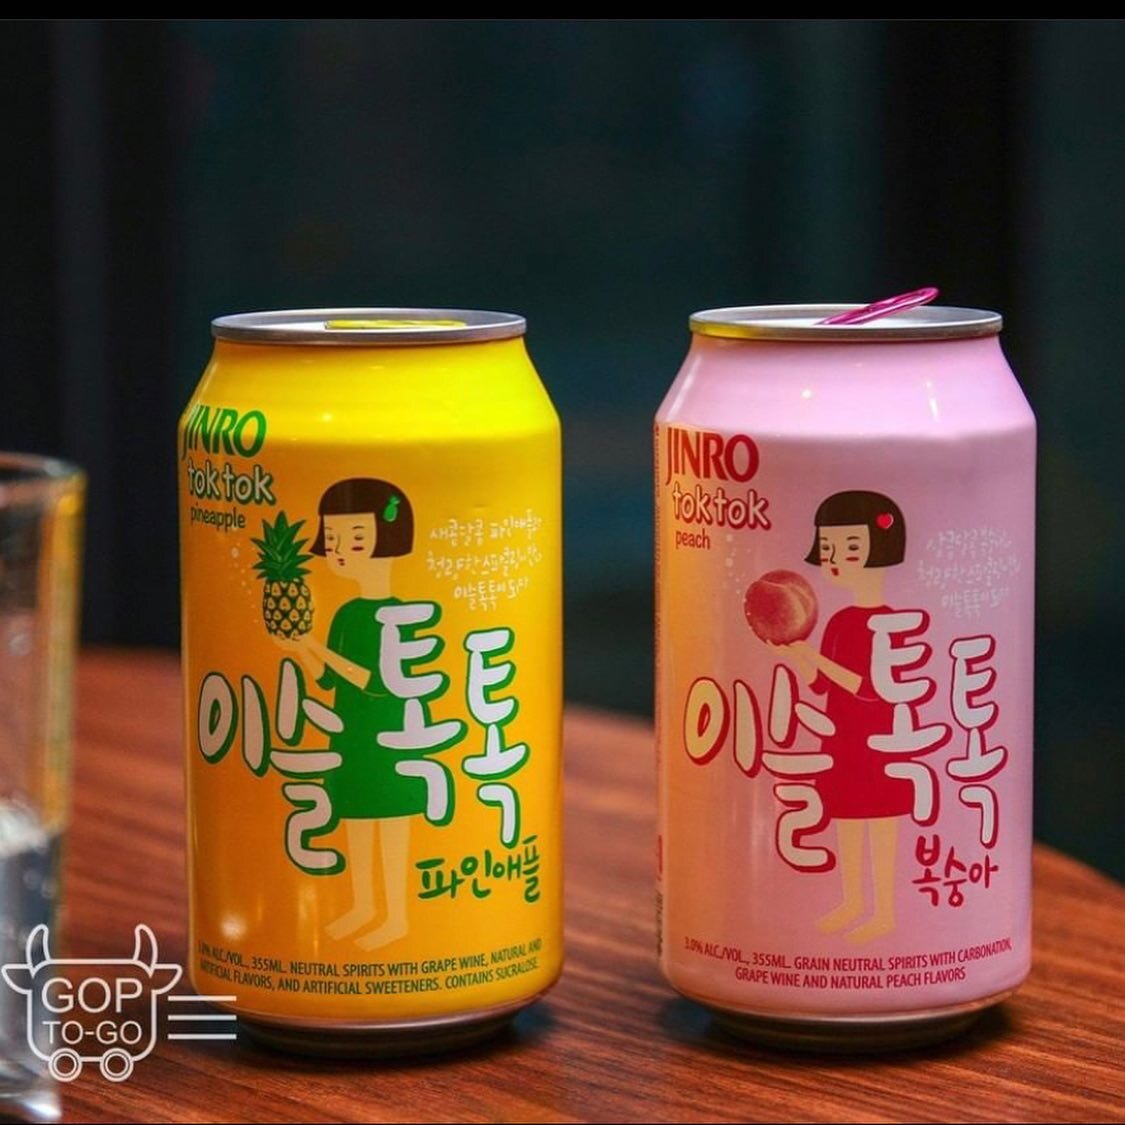 Thirsty Thursdays got us like 🤪
Have you ever seen these types of soju-based drinks?
-
Not your average green bottle soju 😉
-
-

🚲 Order today for delivery and enjoy your favorite gopchang BBQ from the safety of your couch.⠀
-
📲 Outdoor seating s